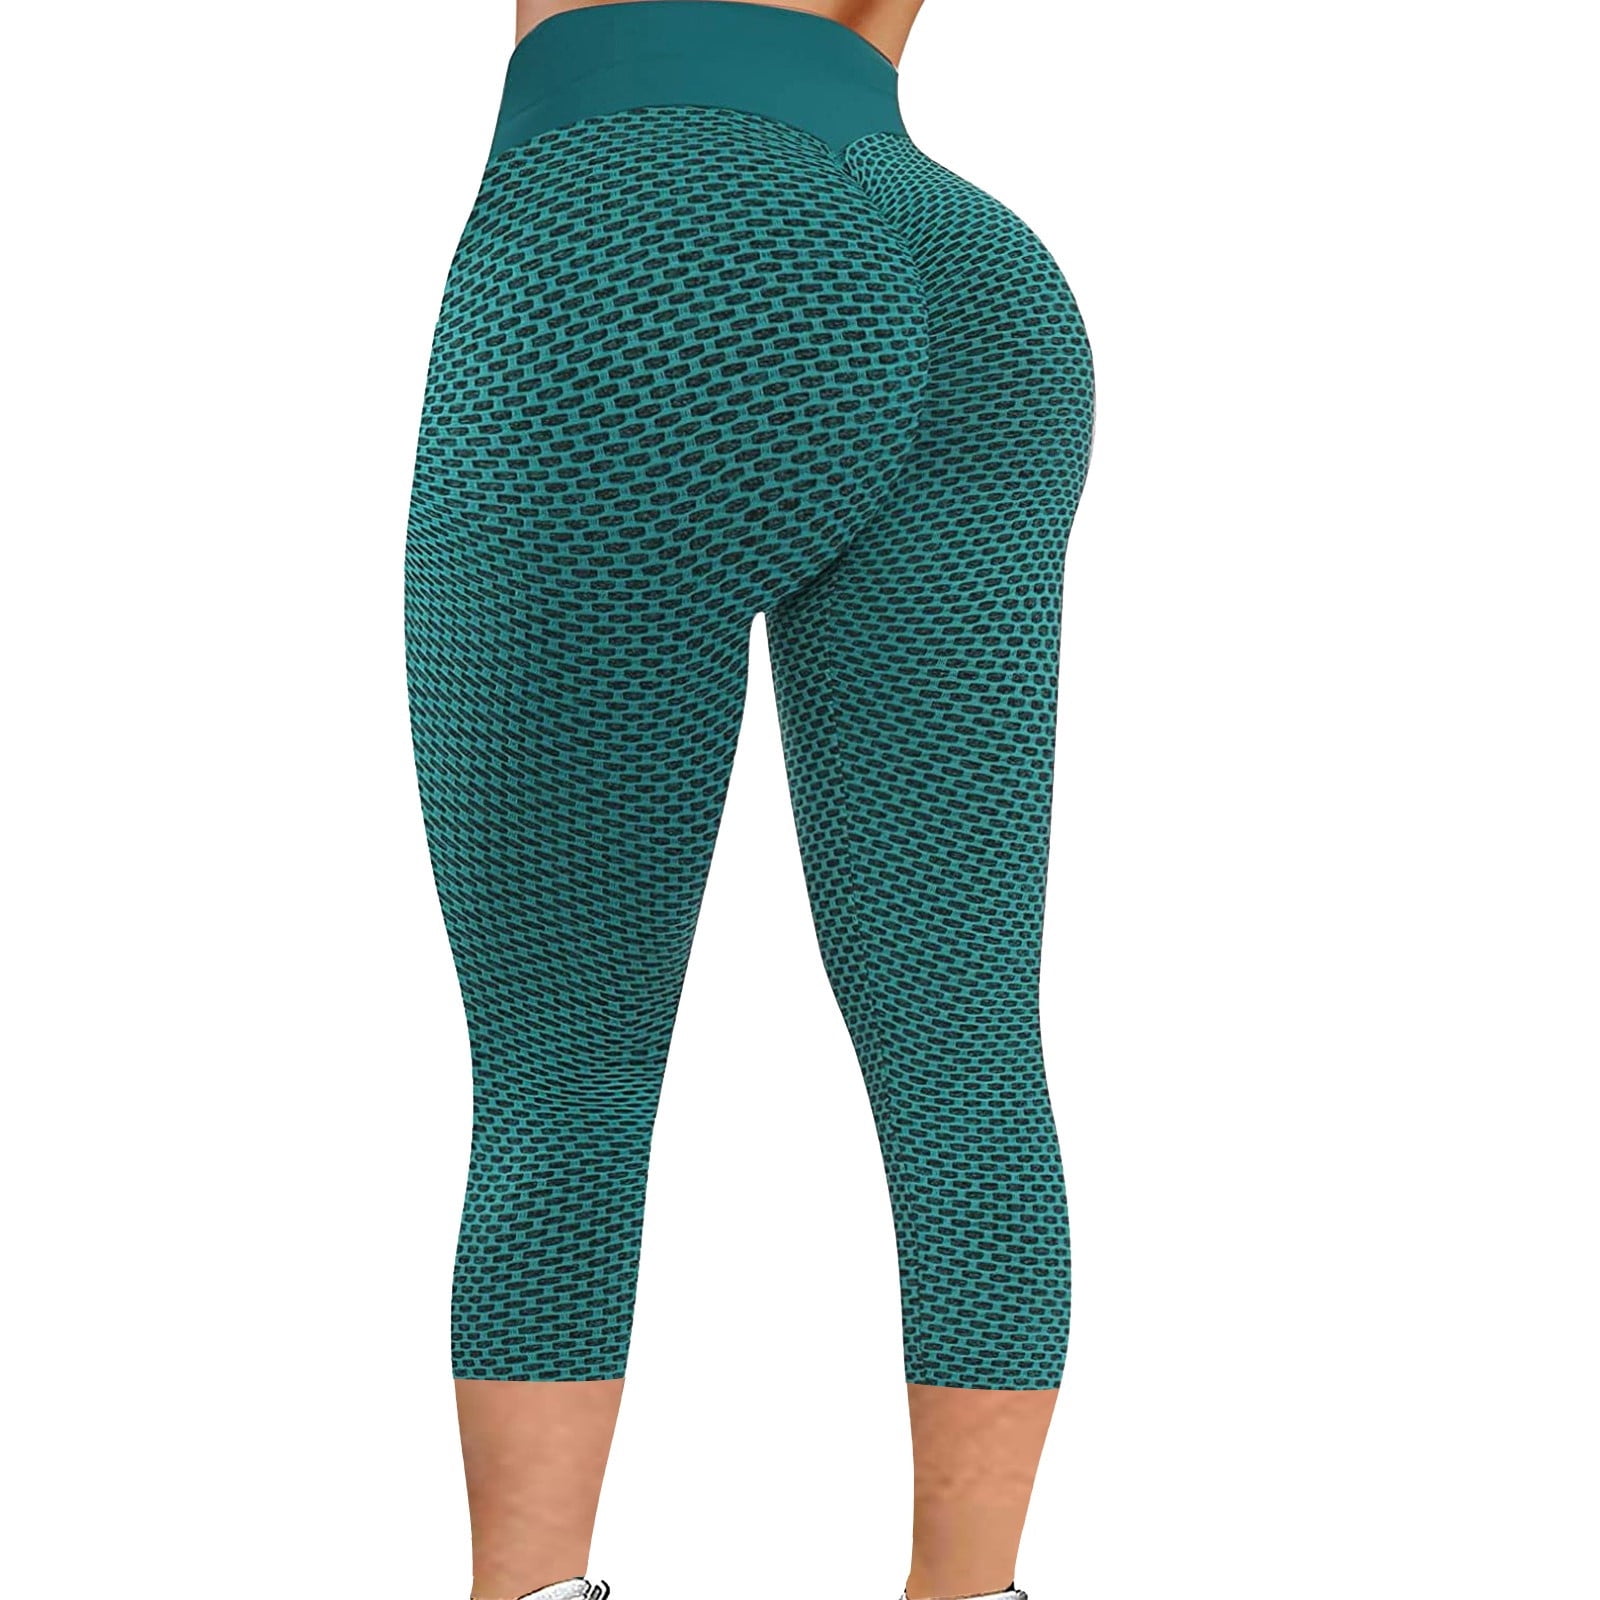 Yoga Lu Leggings: Womens Cropped Outfits For Fitness, Exercise, And Running  Slim Fit Align Pants From Linhome99, $6.57